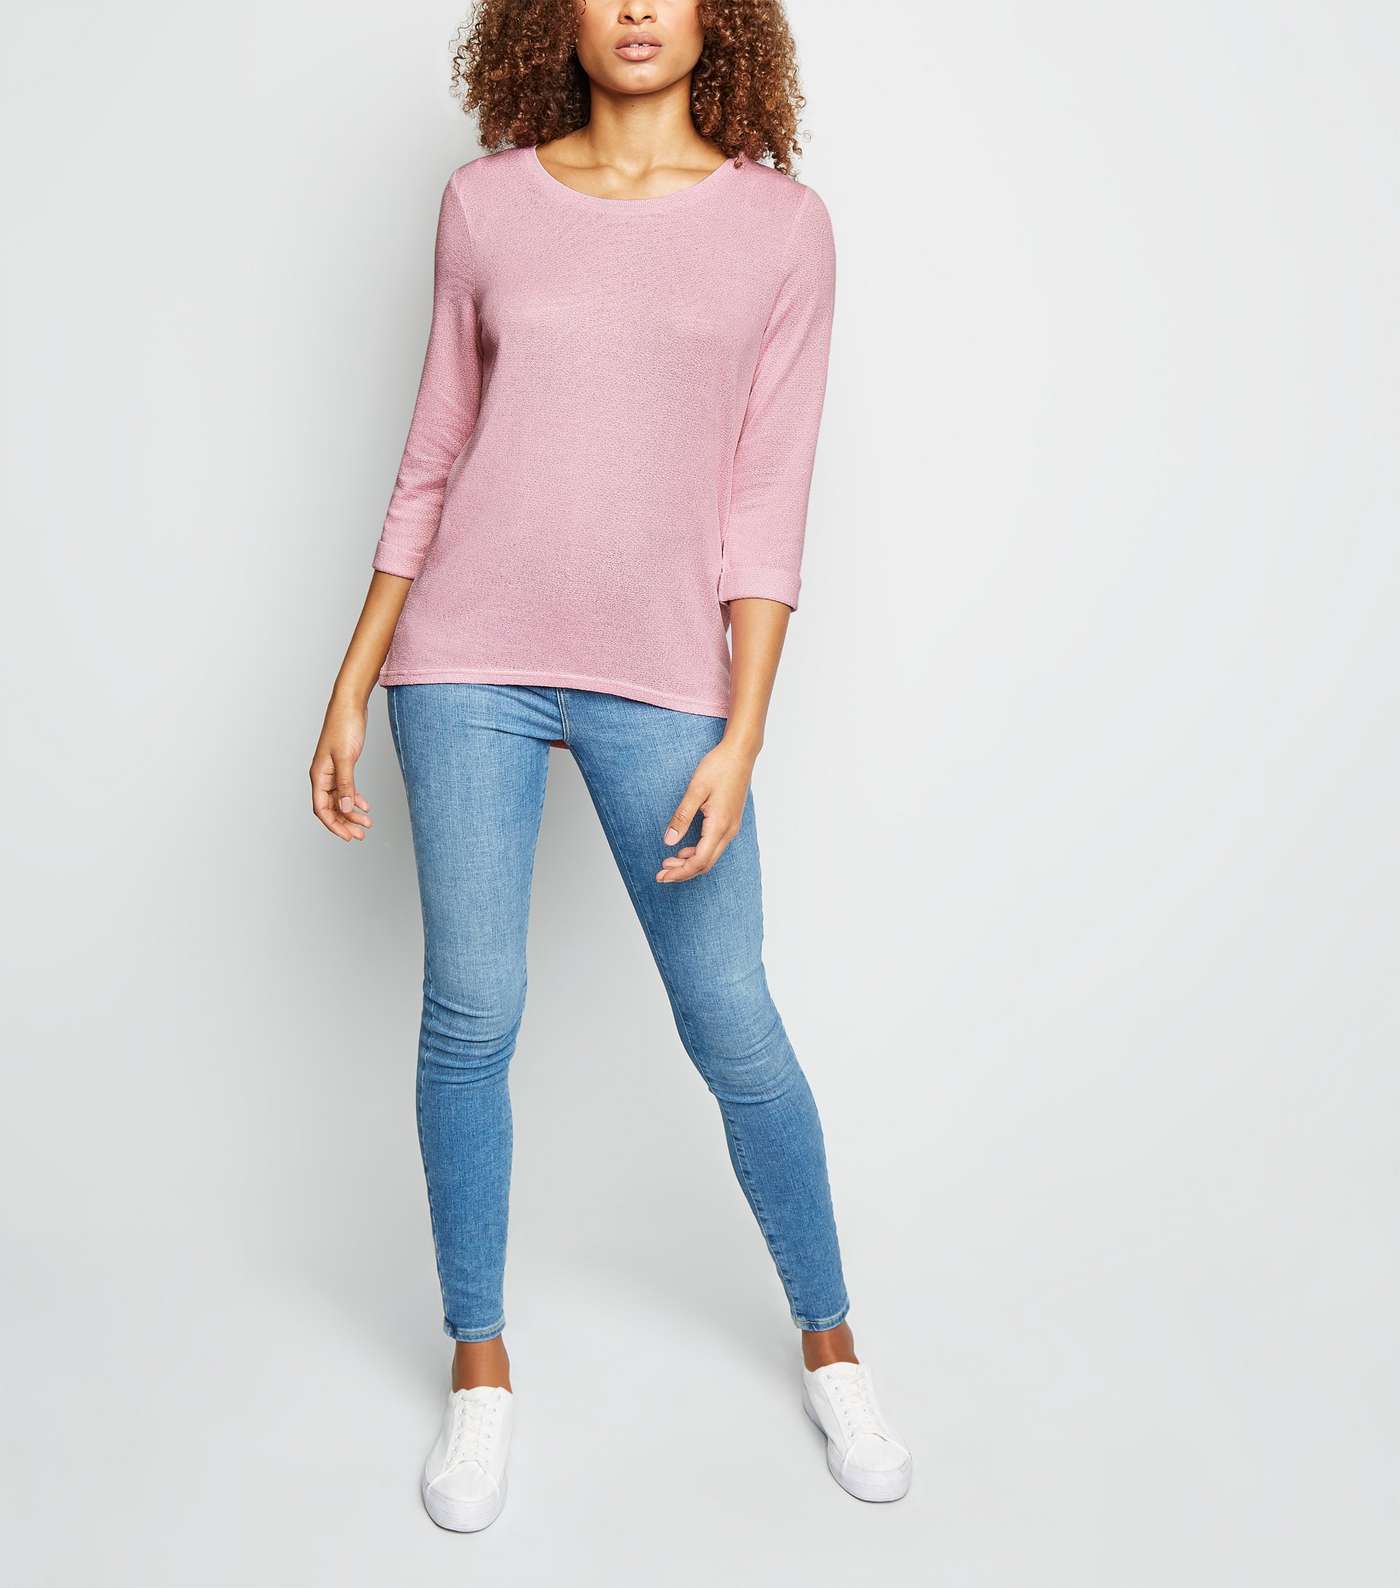 Mid Pink 3/4 Sleeve Fine Knit Top Image 2